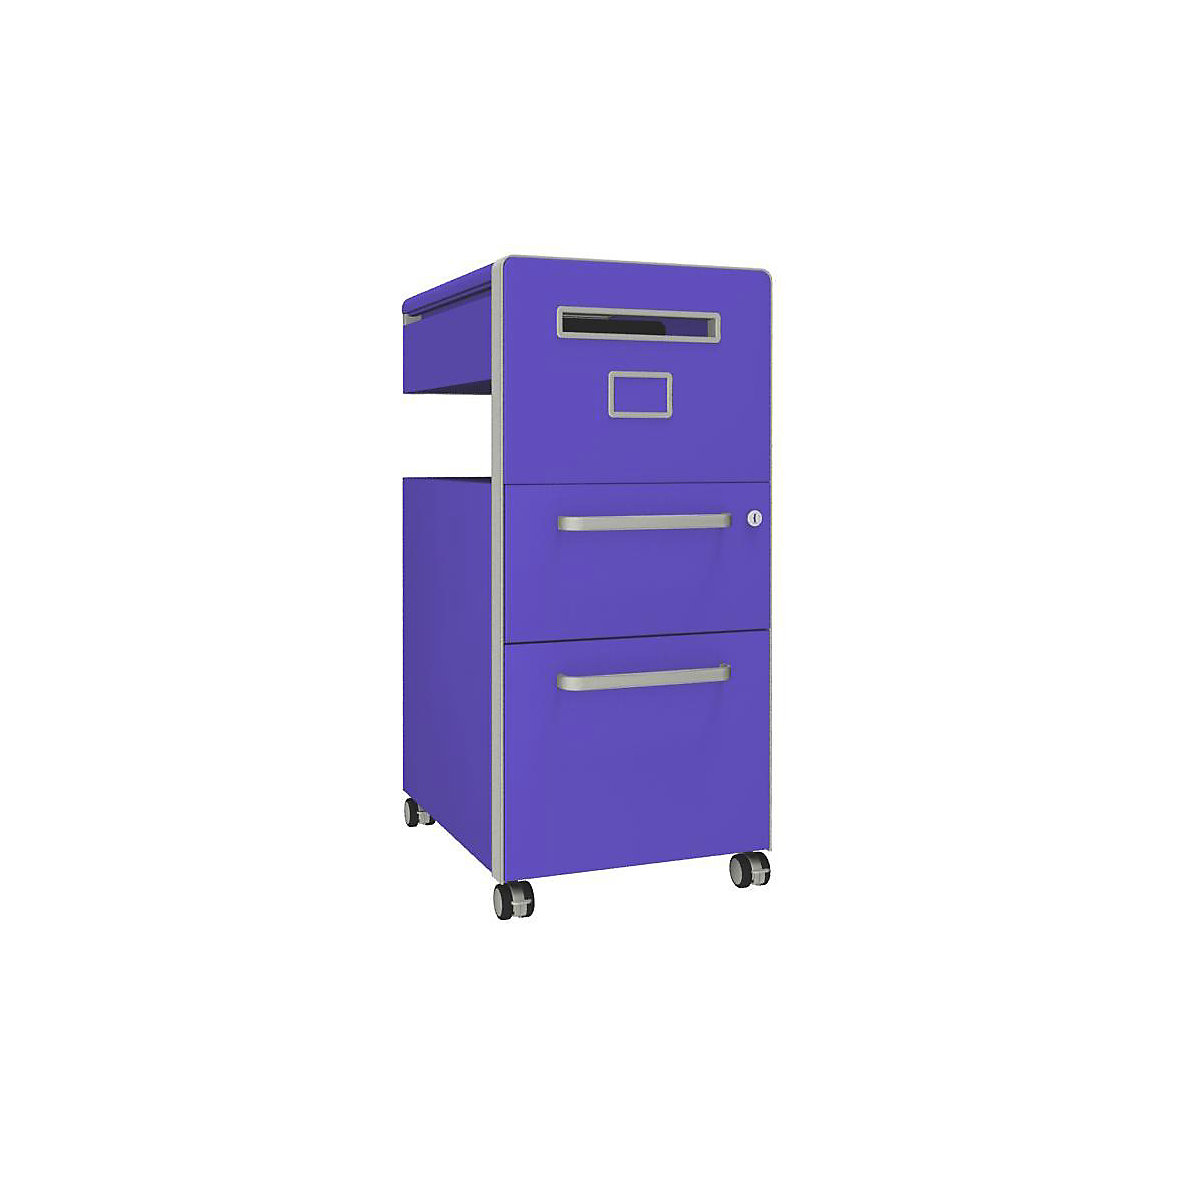 Bite™ pedestal furniture, with 1 whiteboard, opens on the right side – BISLEY, with 1 universal drawer, 1 suspension file drawer, parma-23